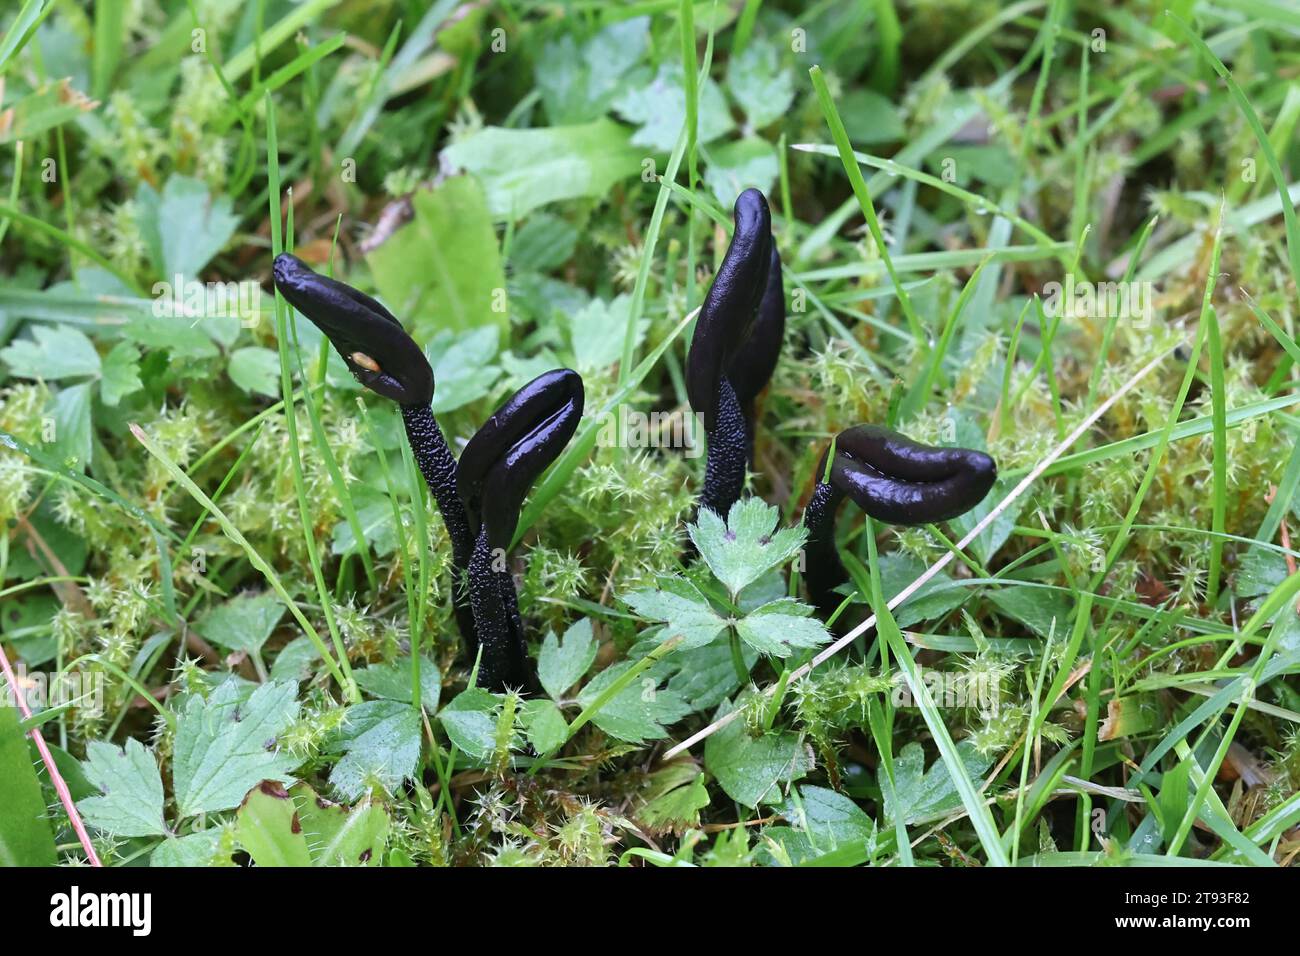 Geoglossum fallax, commonly known as deceptive earthtongue, wild fungus from Finland Stock Photo